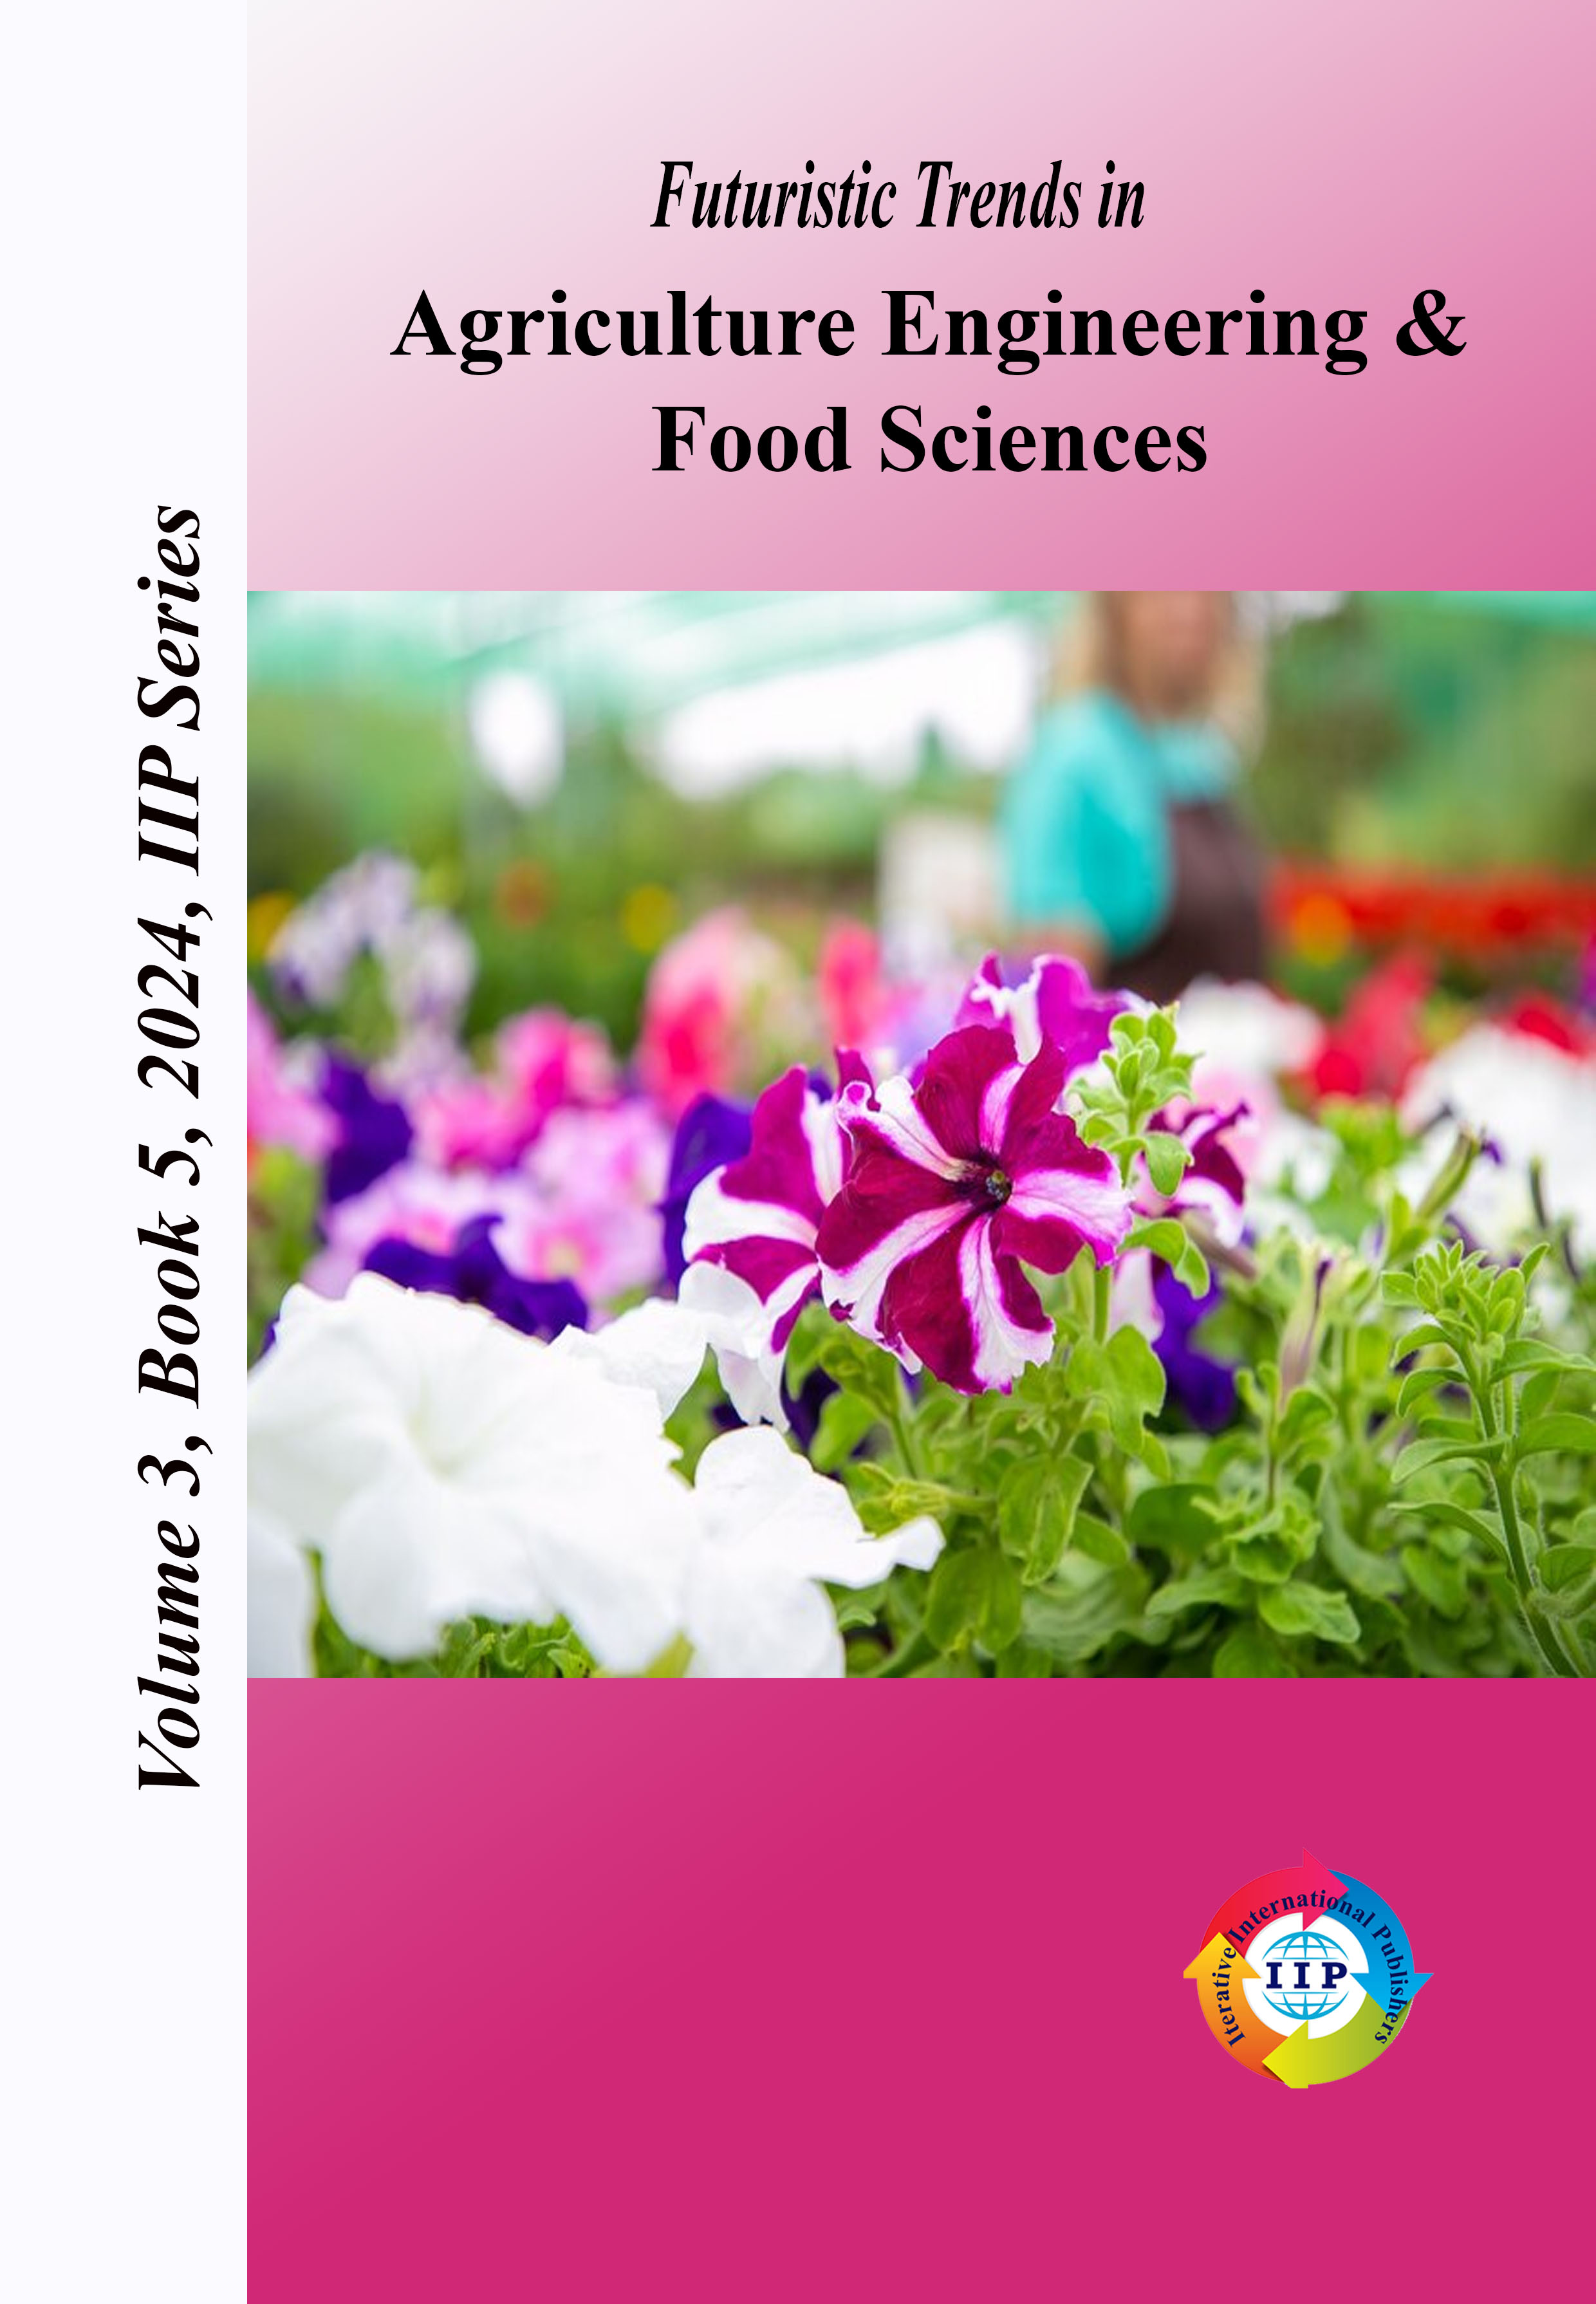 Futuristic Trends in Agriculture Engineering & Food Sciences Volume 3 Book 5